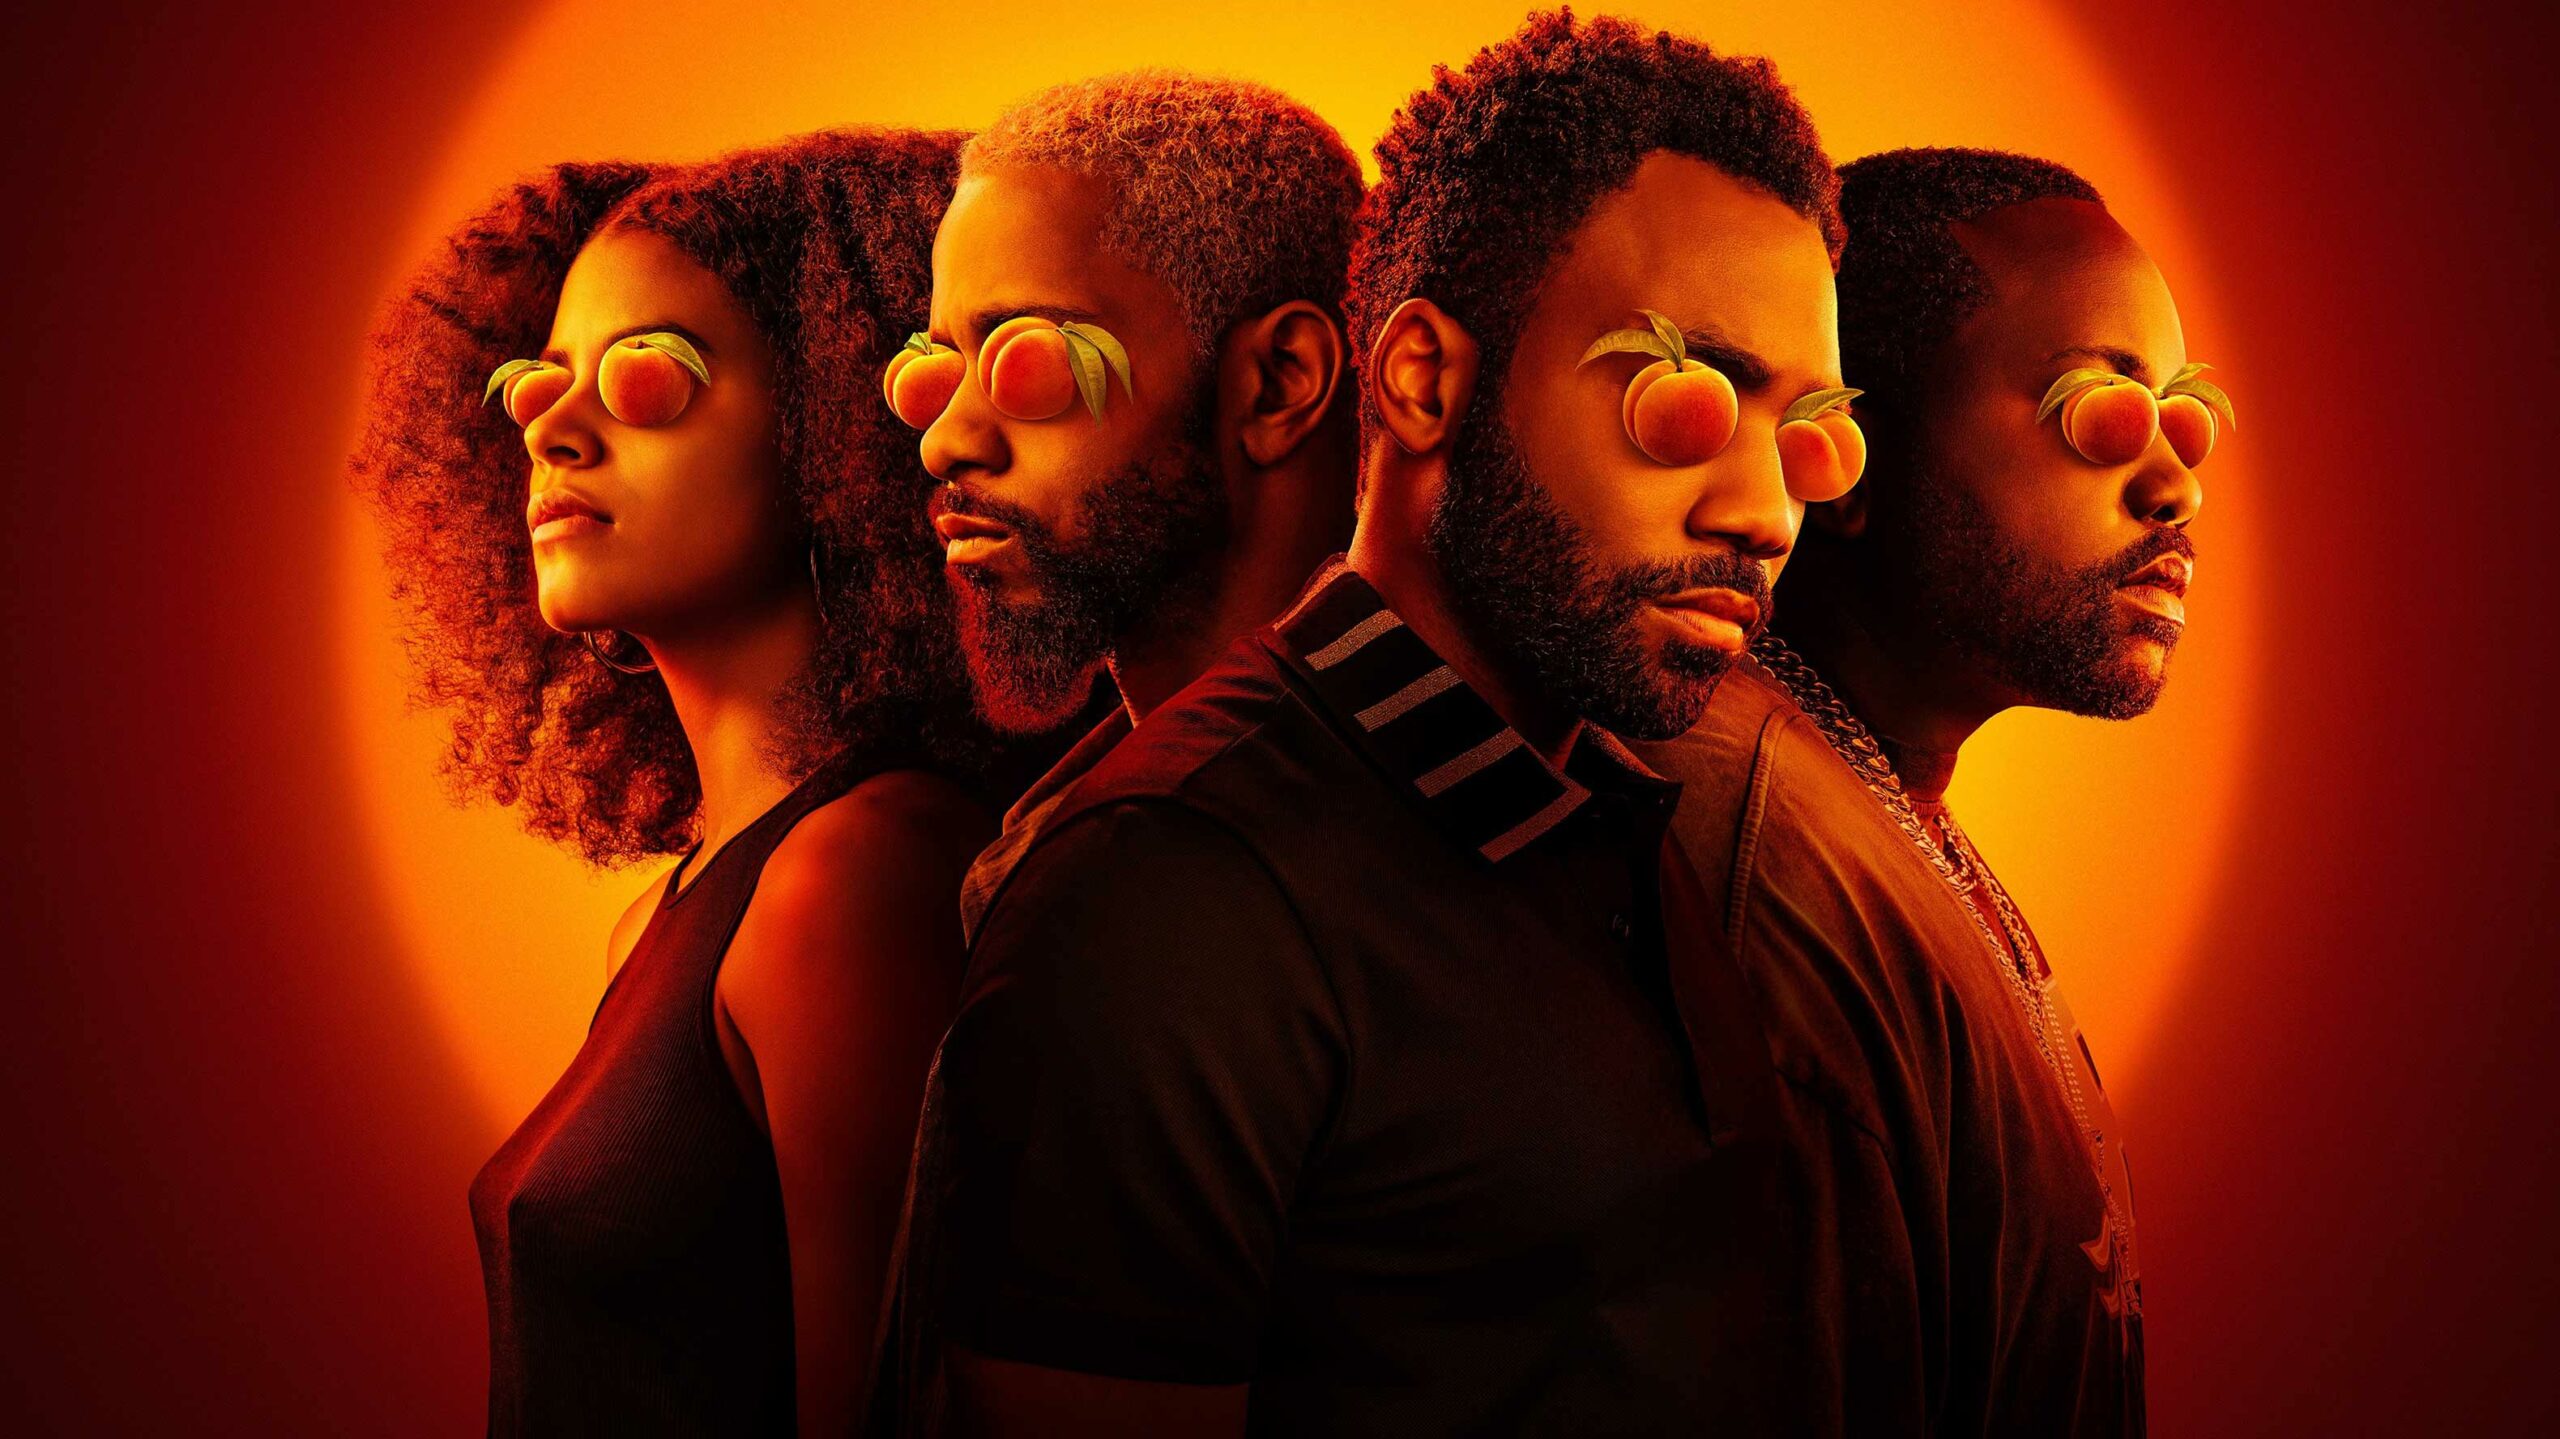 Atlanta Season 4 key art featuring, from left to right, Zazie Beetz, Lakeith Stanfield, Donald Glover and Brian Tyree Henry. They are all wearing peaches over their eyes.